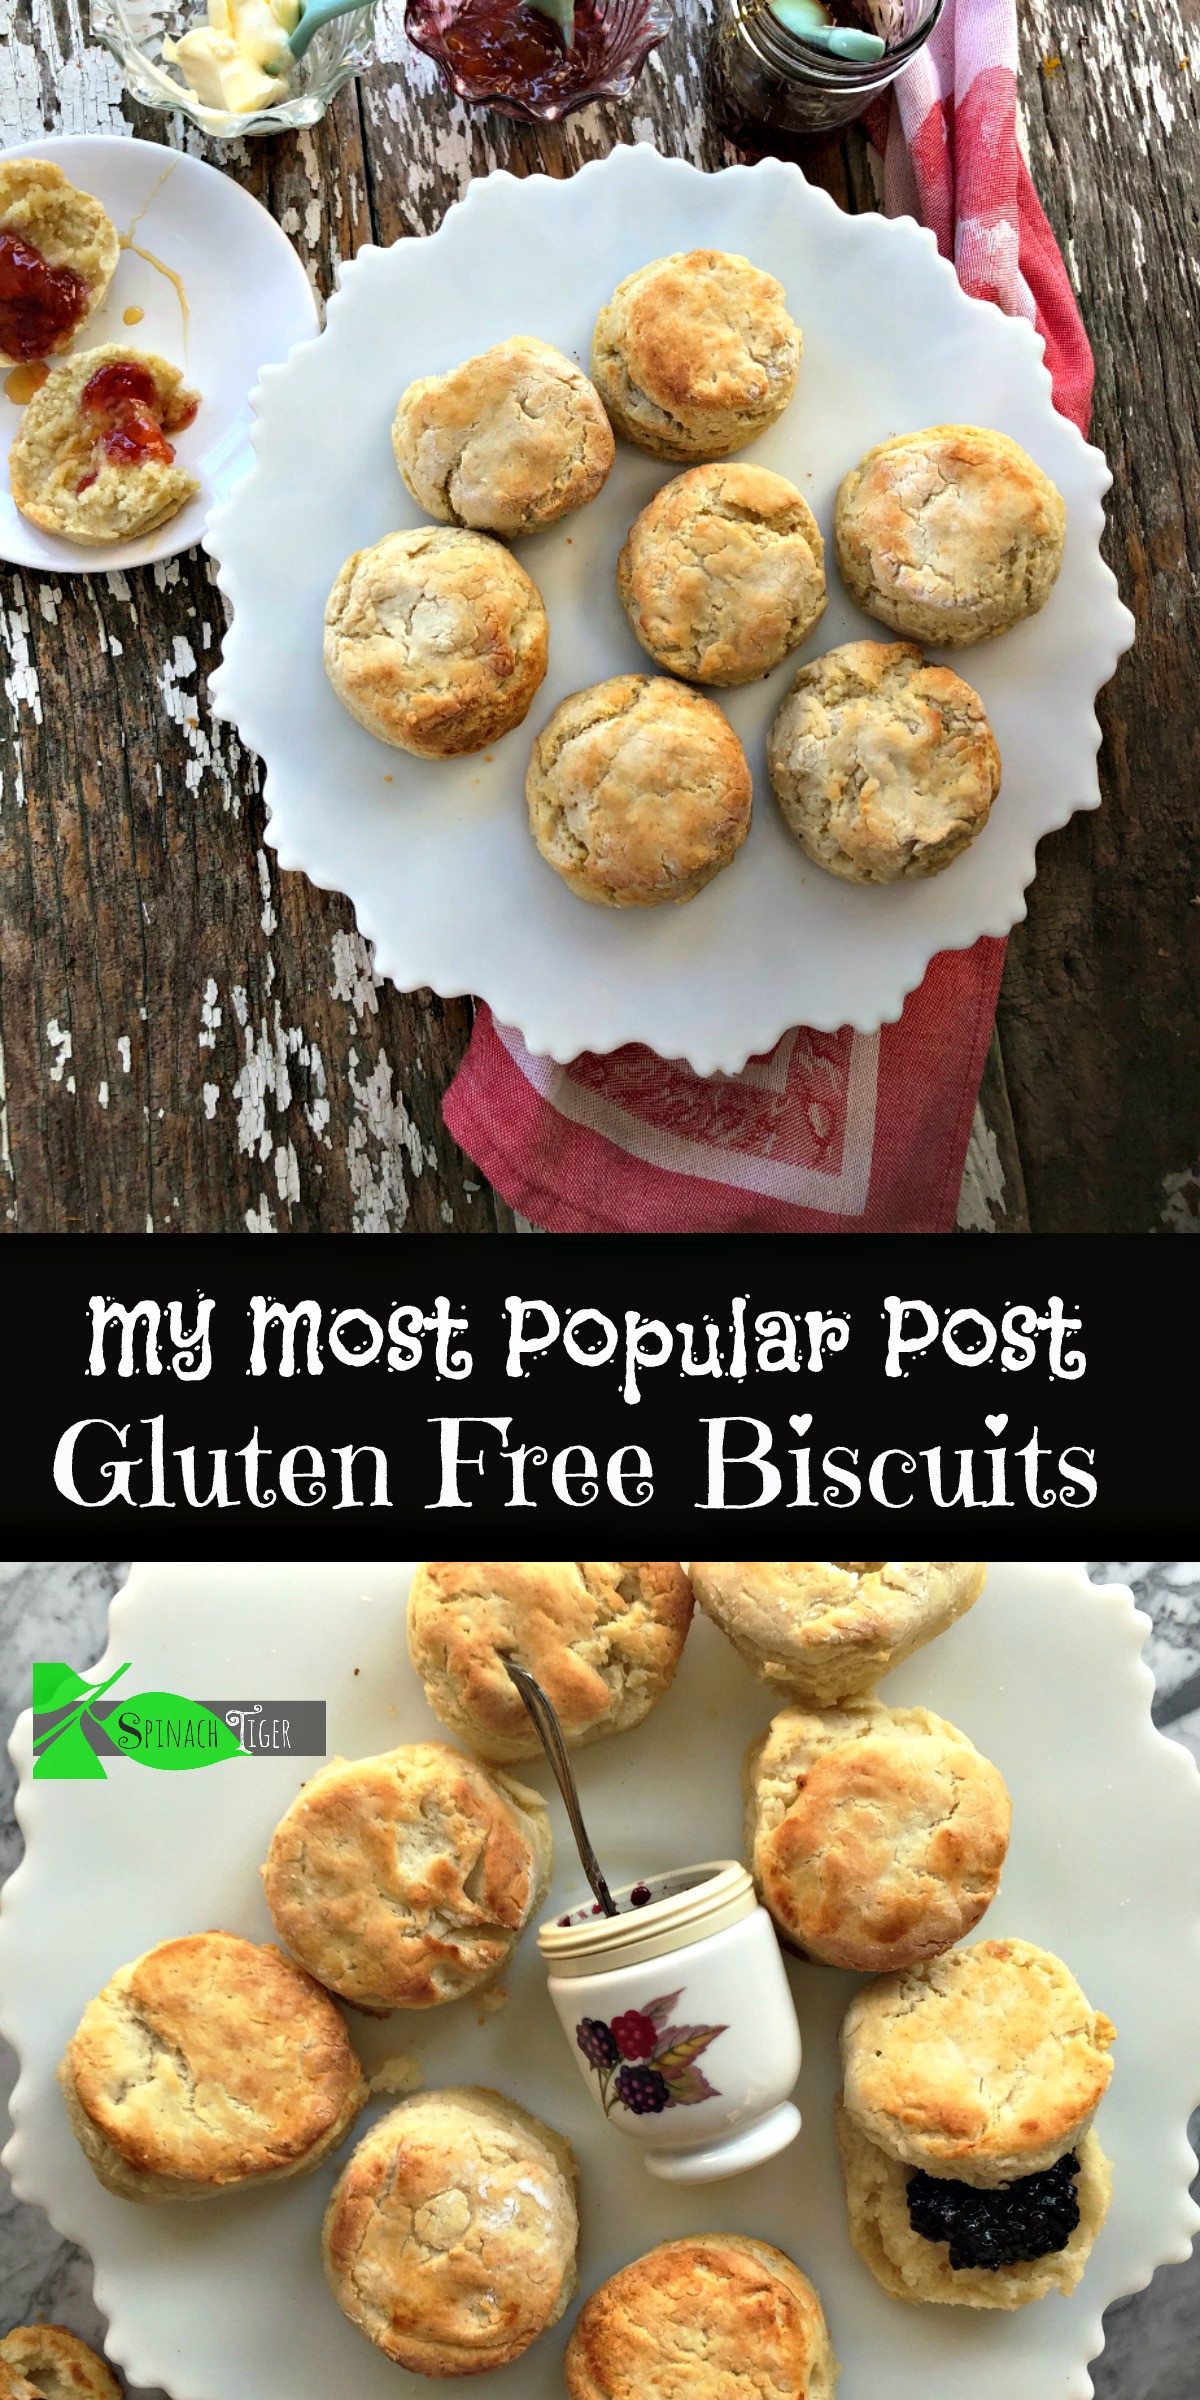 Gluten Free Biscuits Recipes
 Gluten Free Biscuit Fluffy southern approved